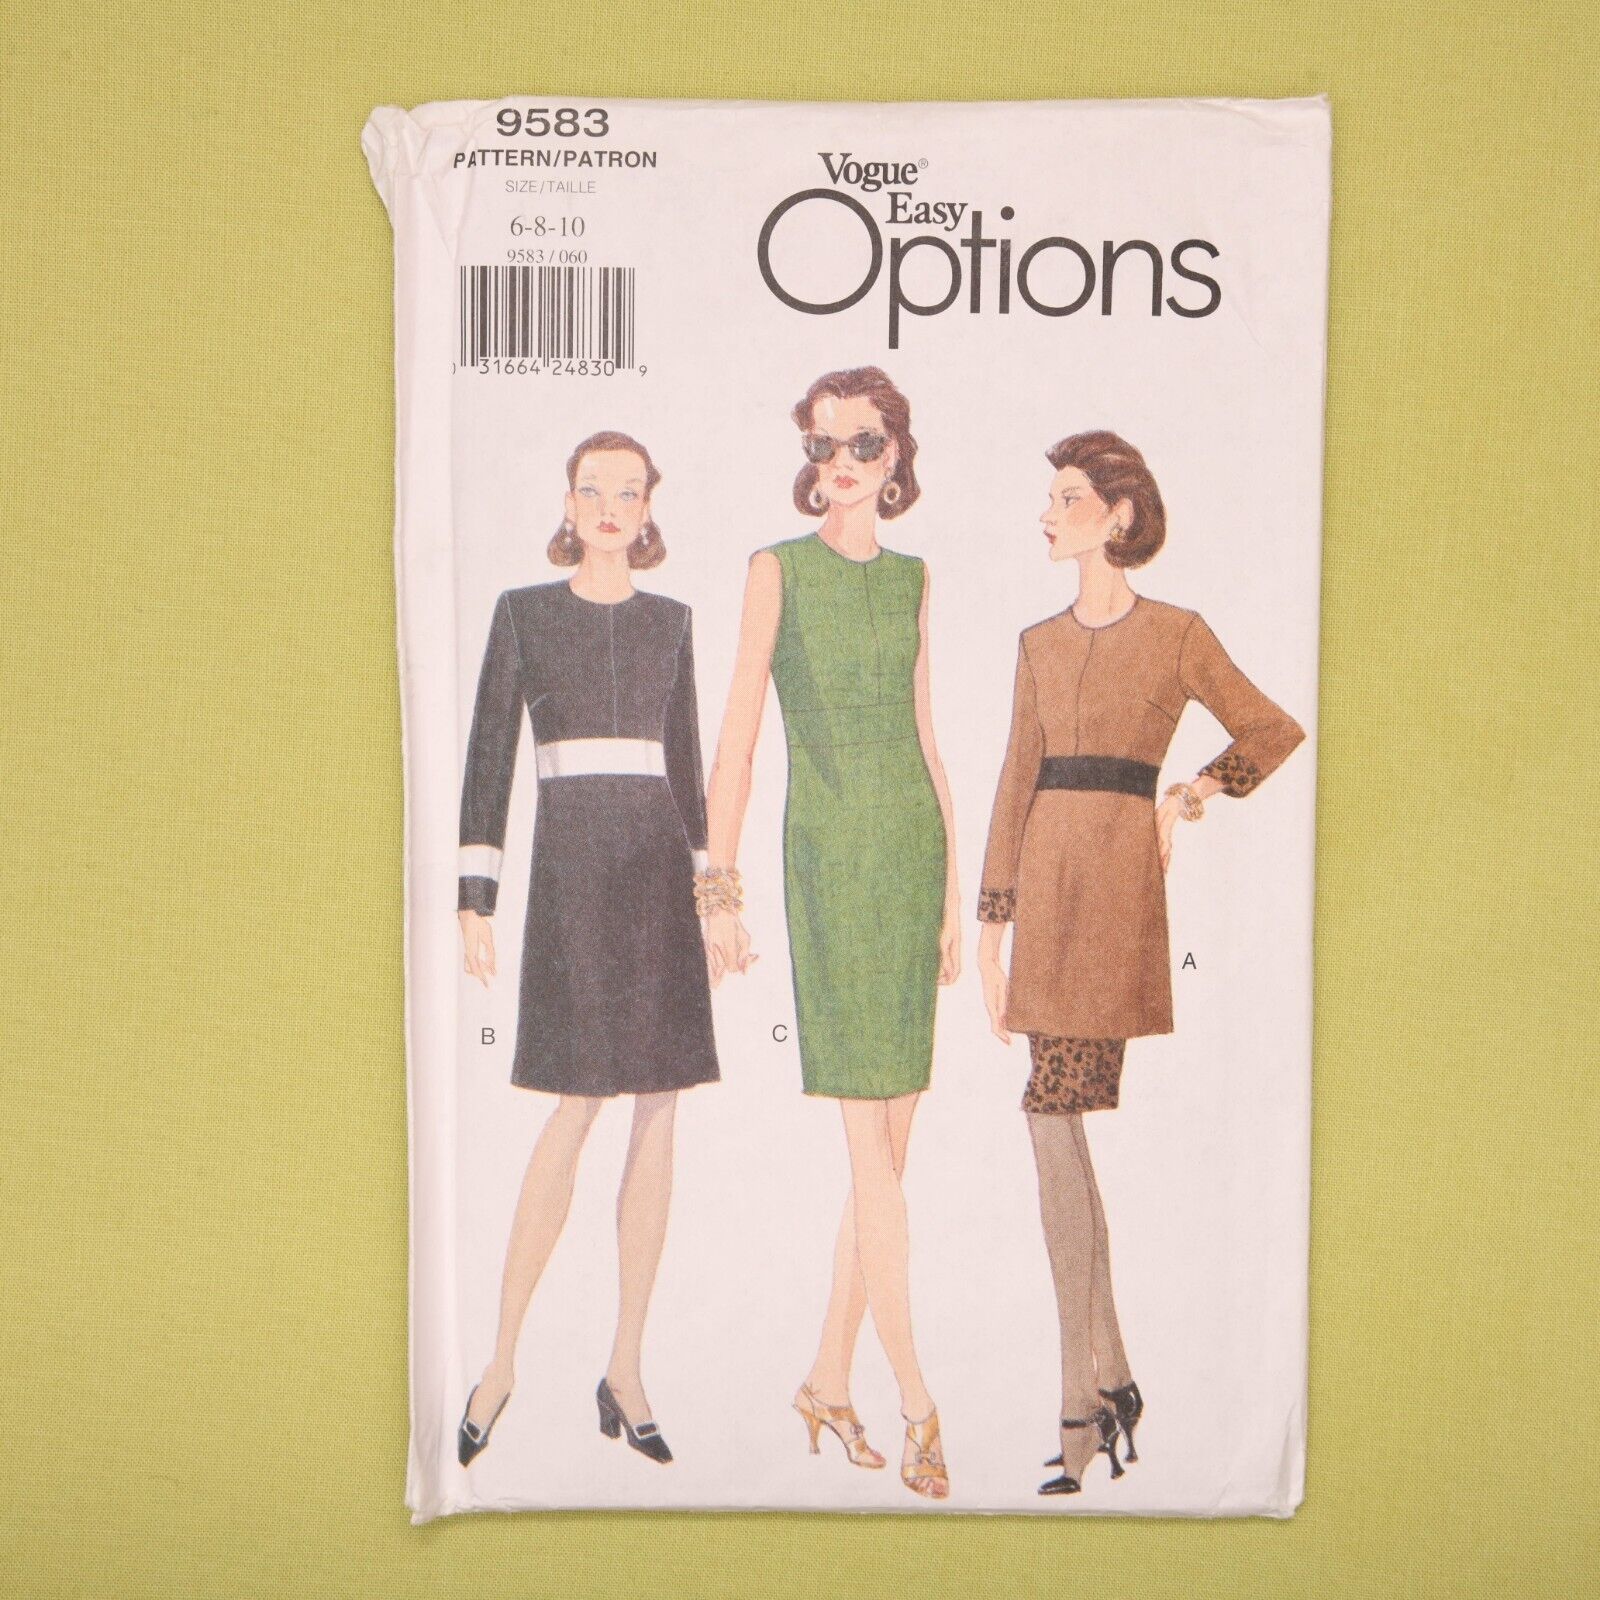 1990s Vogue Easy Options Sewing Pattern - 9583 - Bust 30.5-32.5 - UC FF